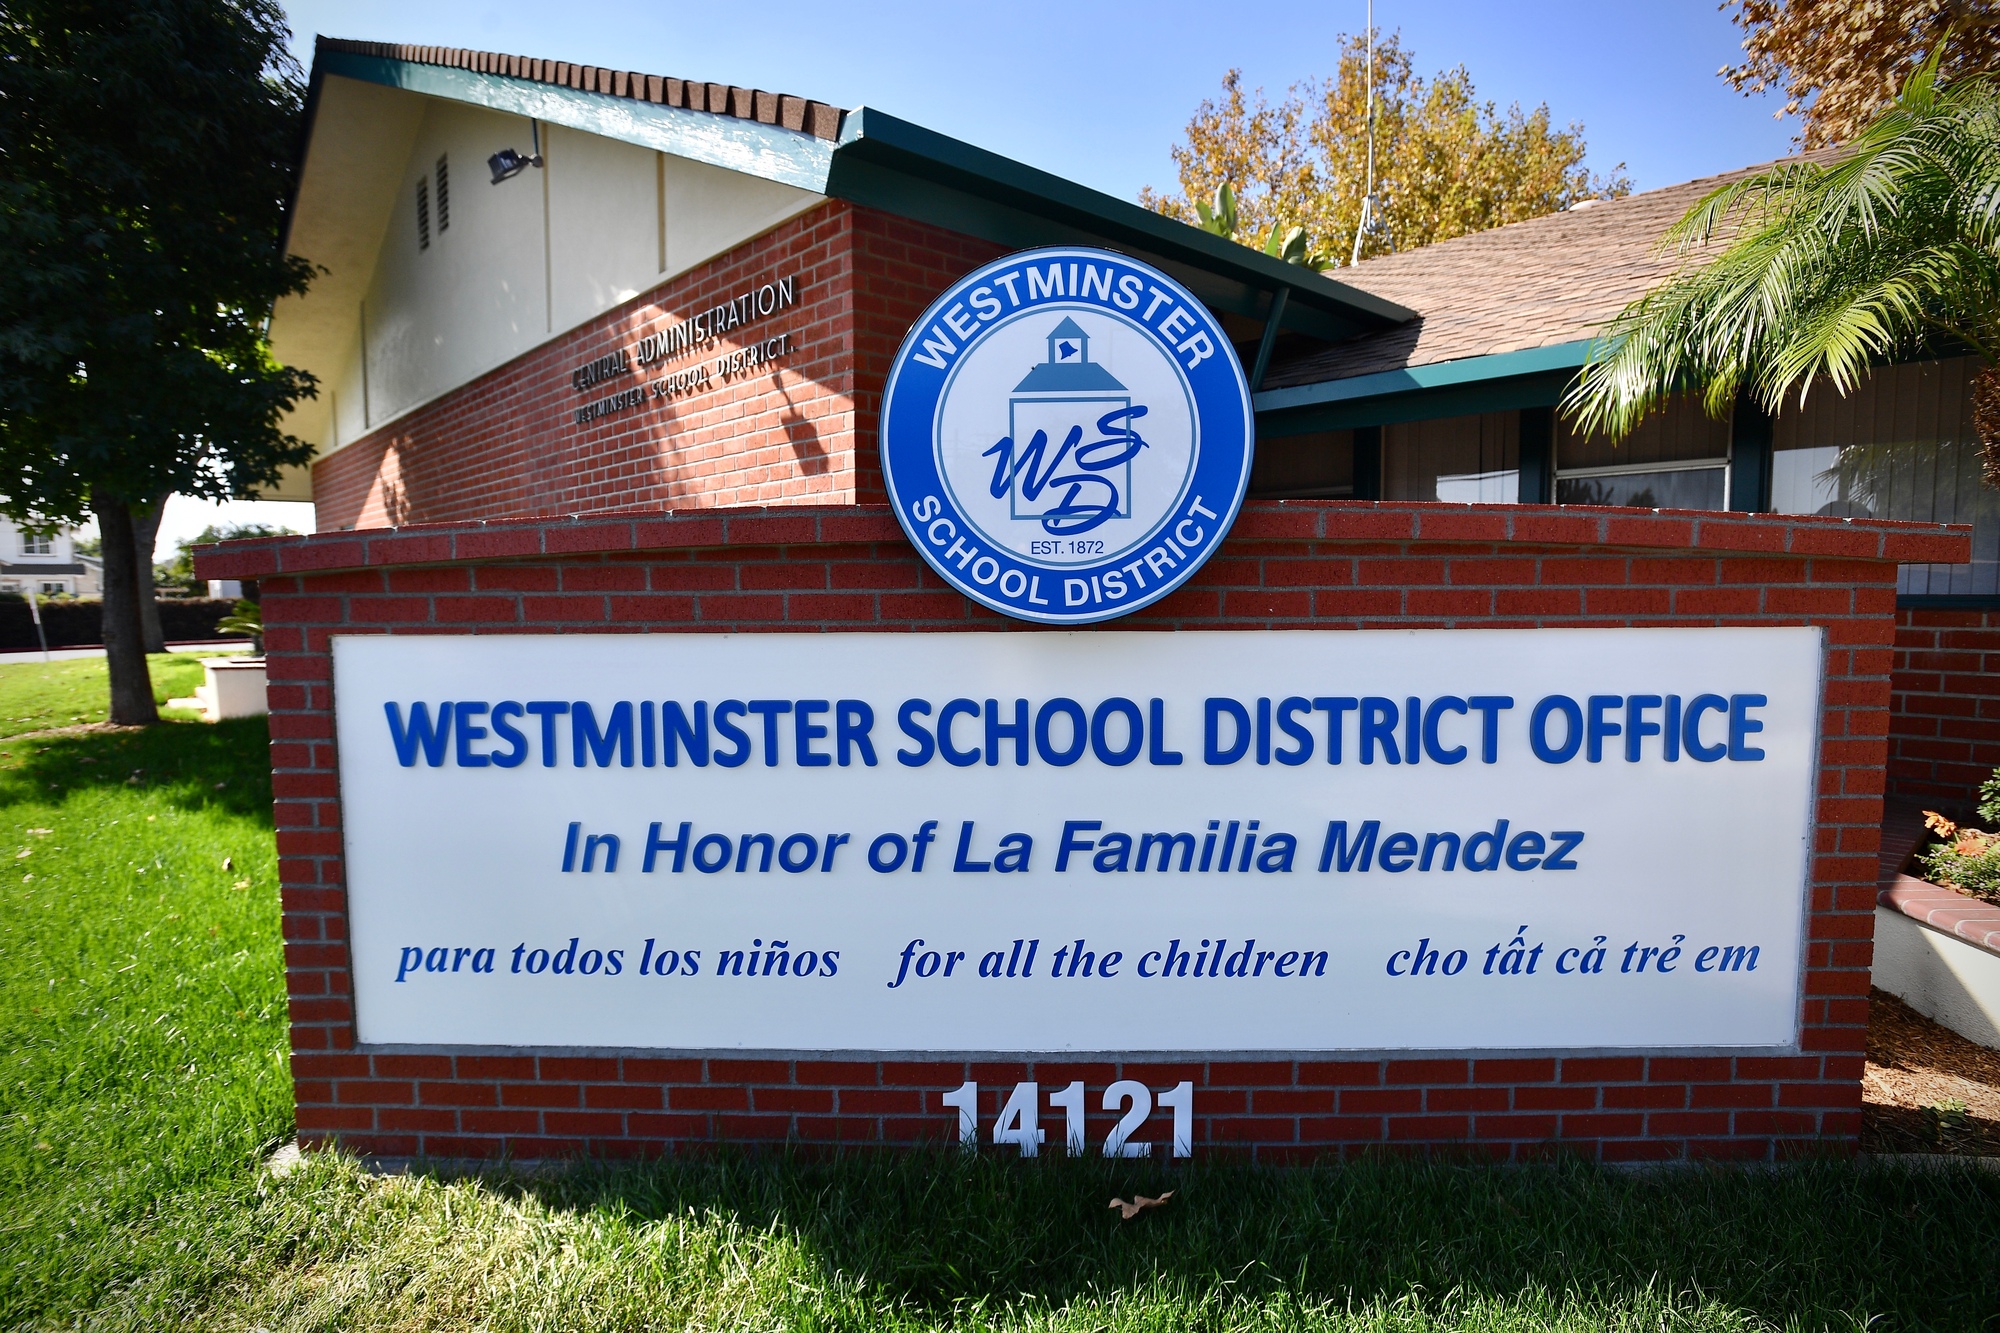 Sylvia Mendez’s family name is featured prominently at the Westminster...